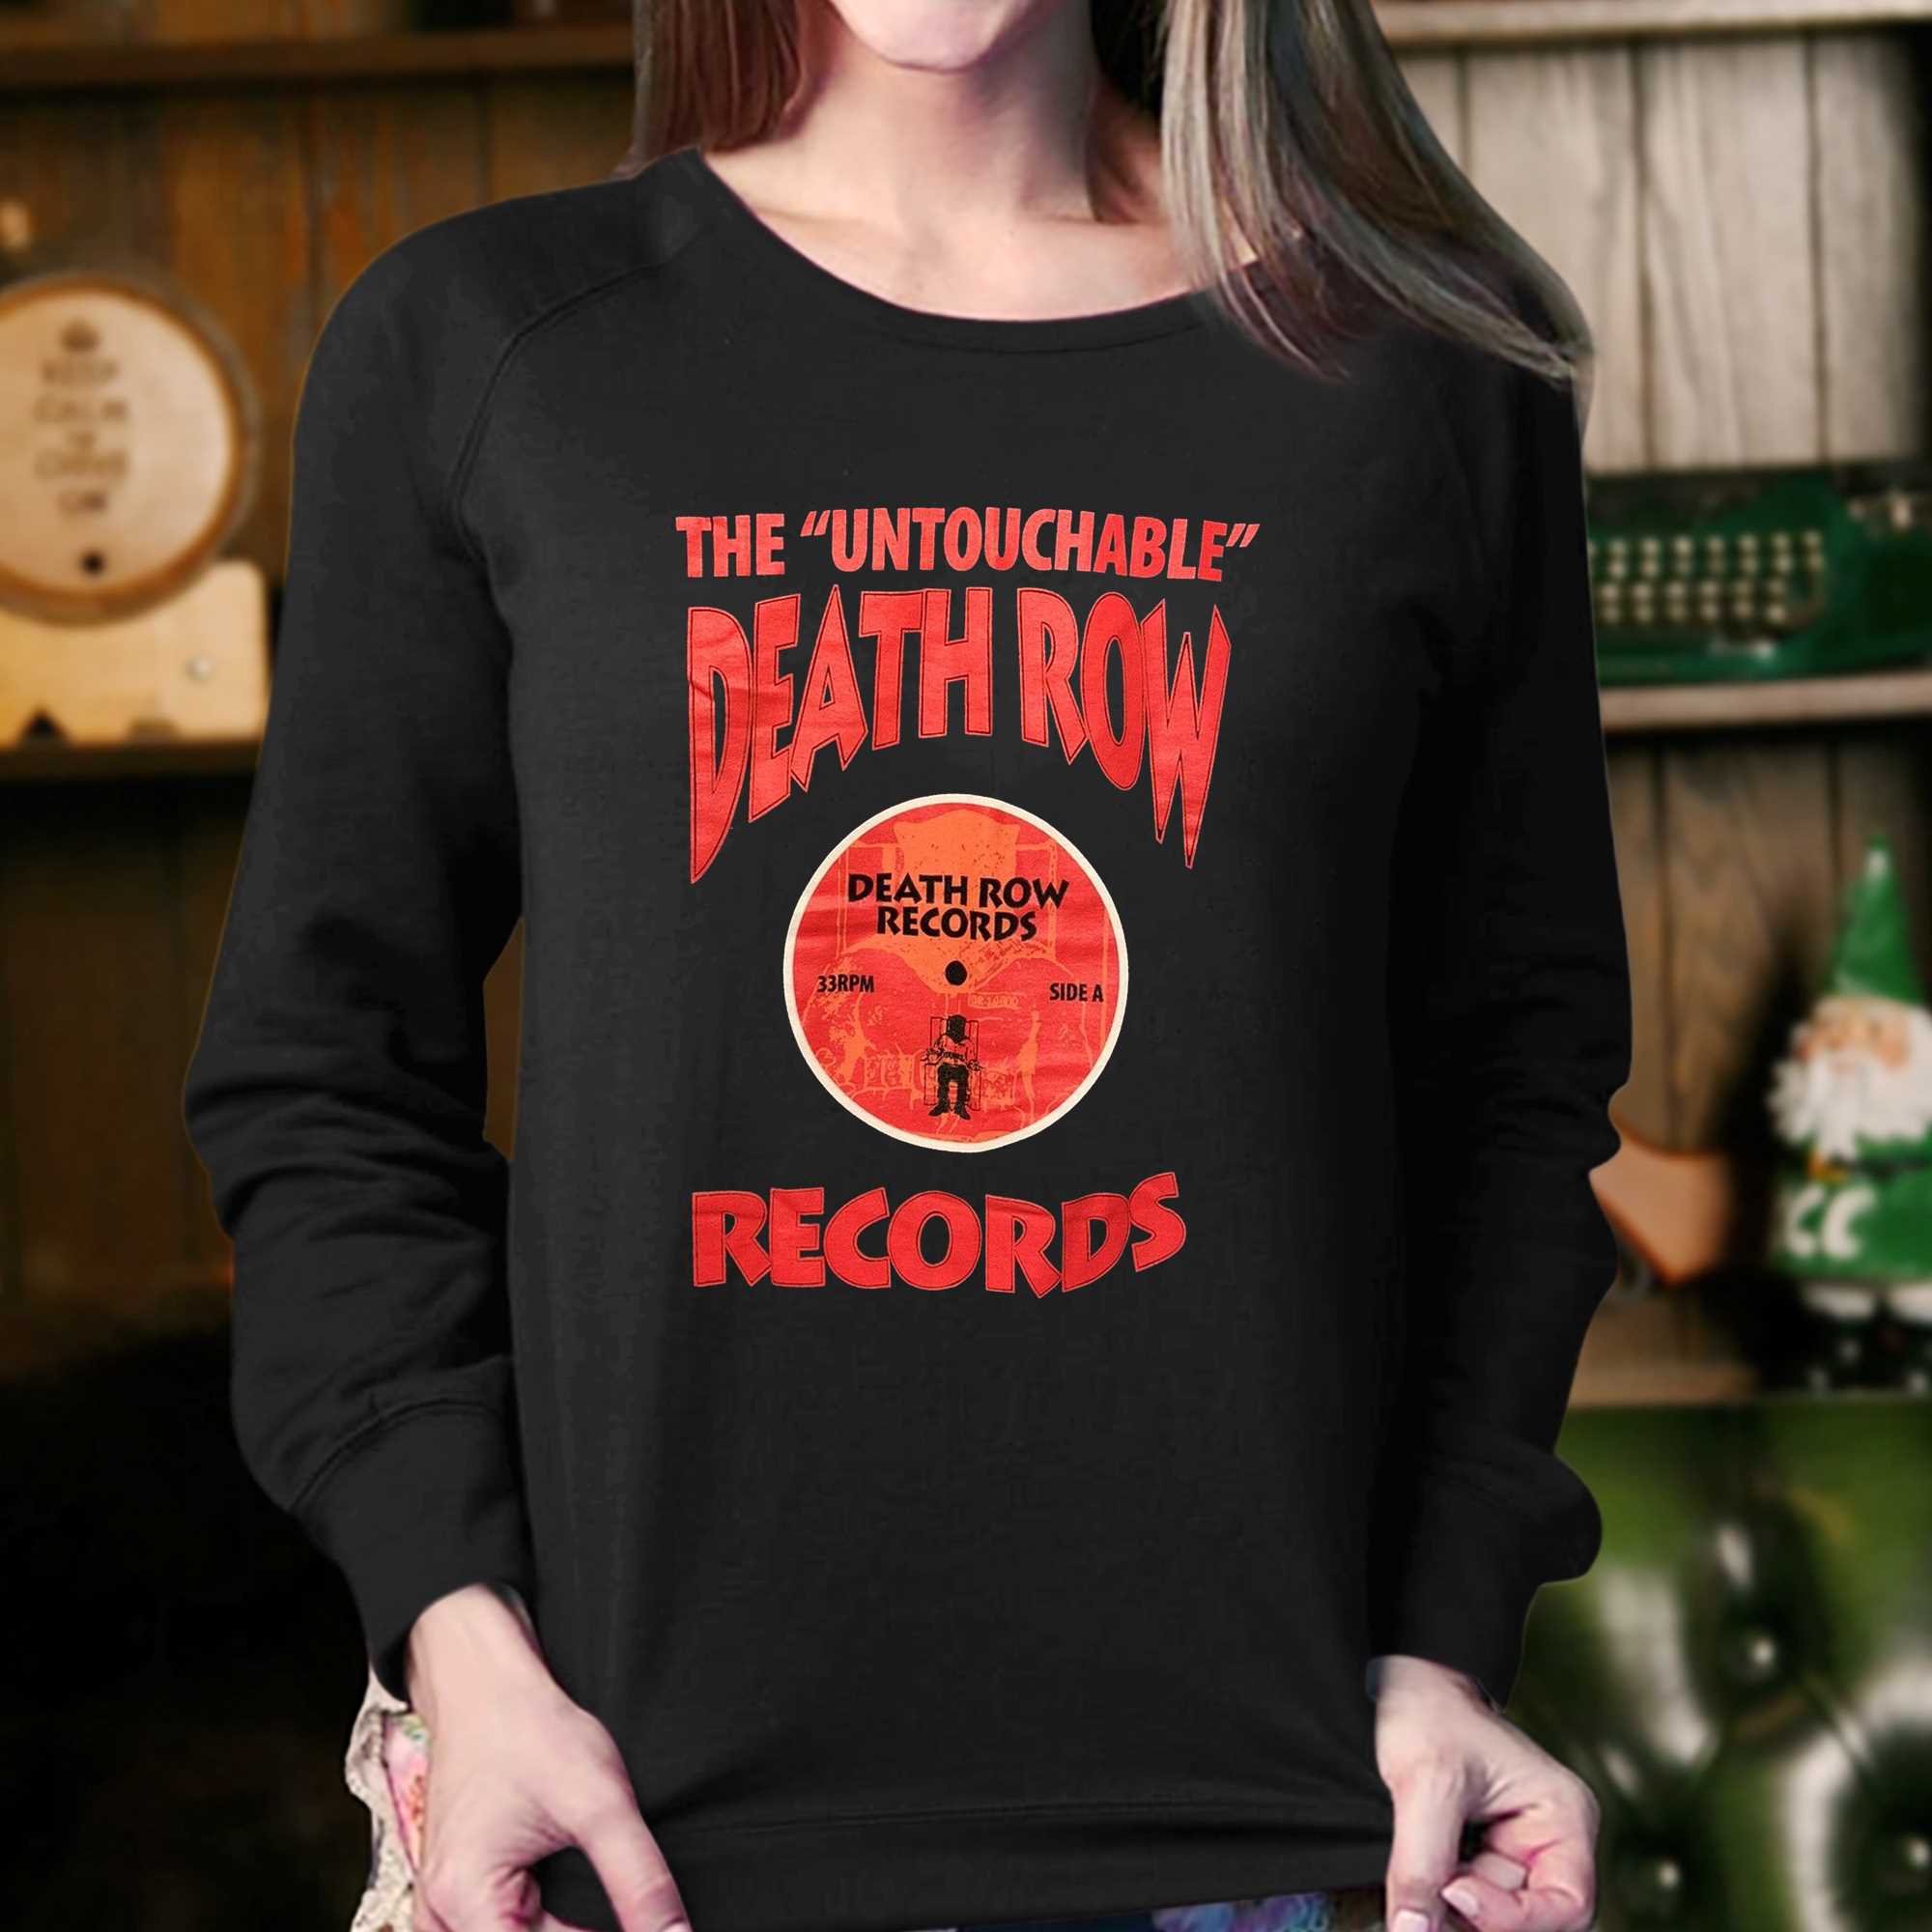 The Untouchable Death Row Records T Shirt Small Black Dr Dre Snoop Dogg ...